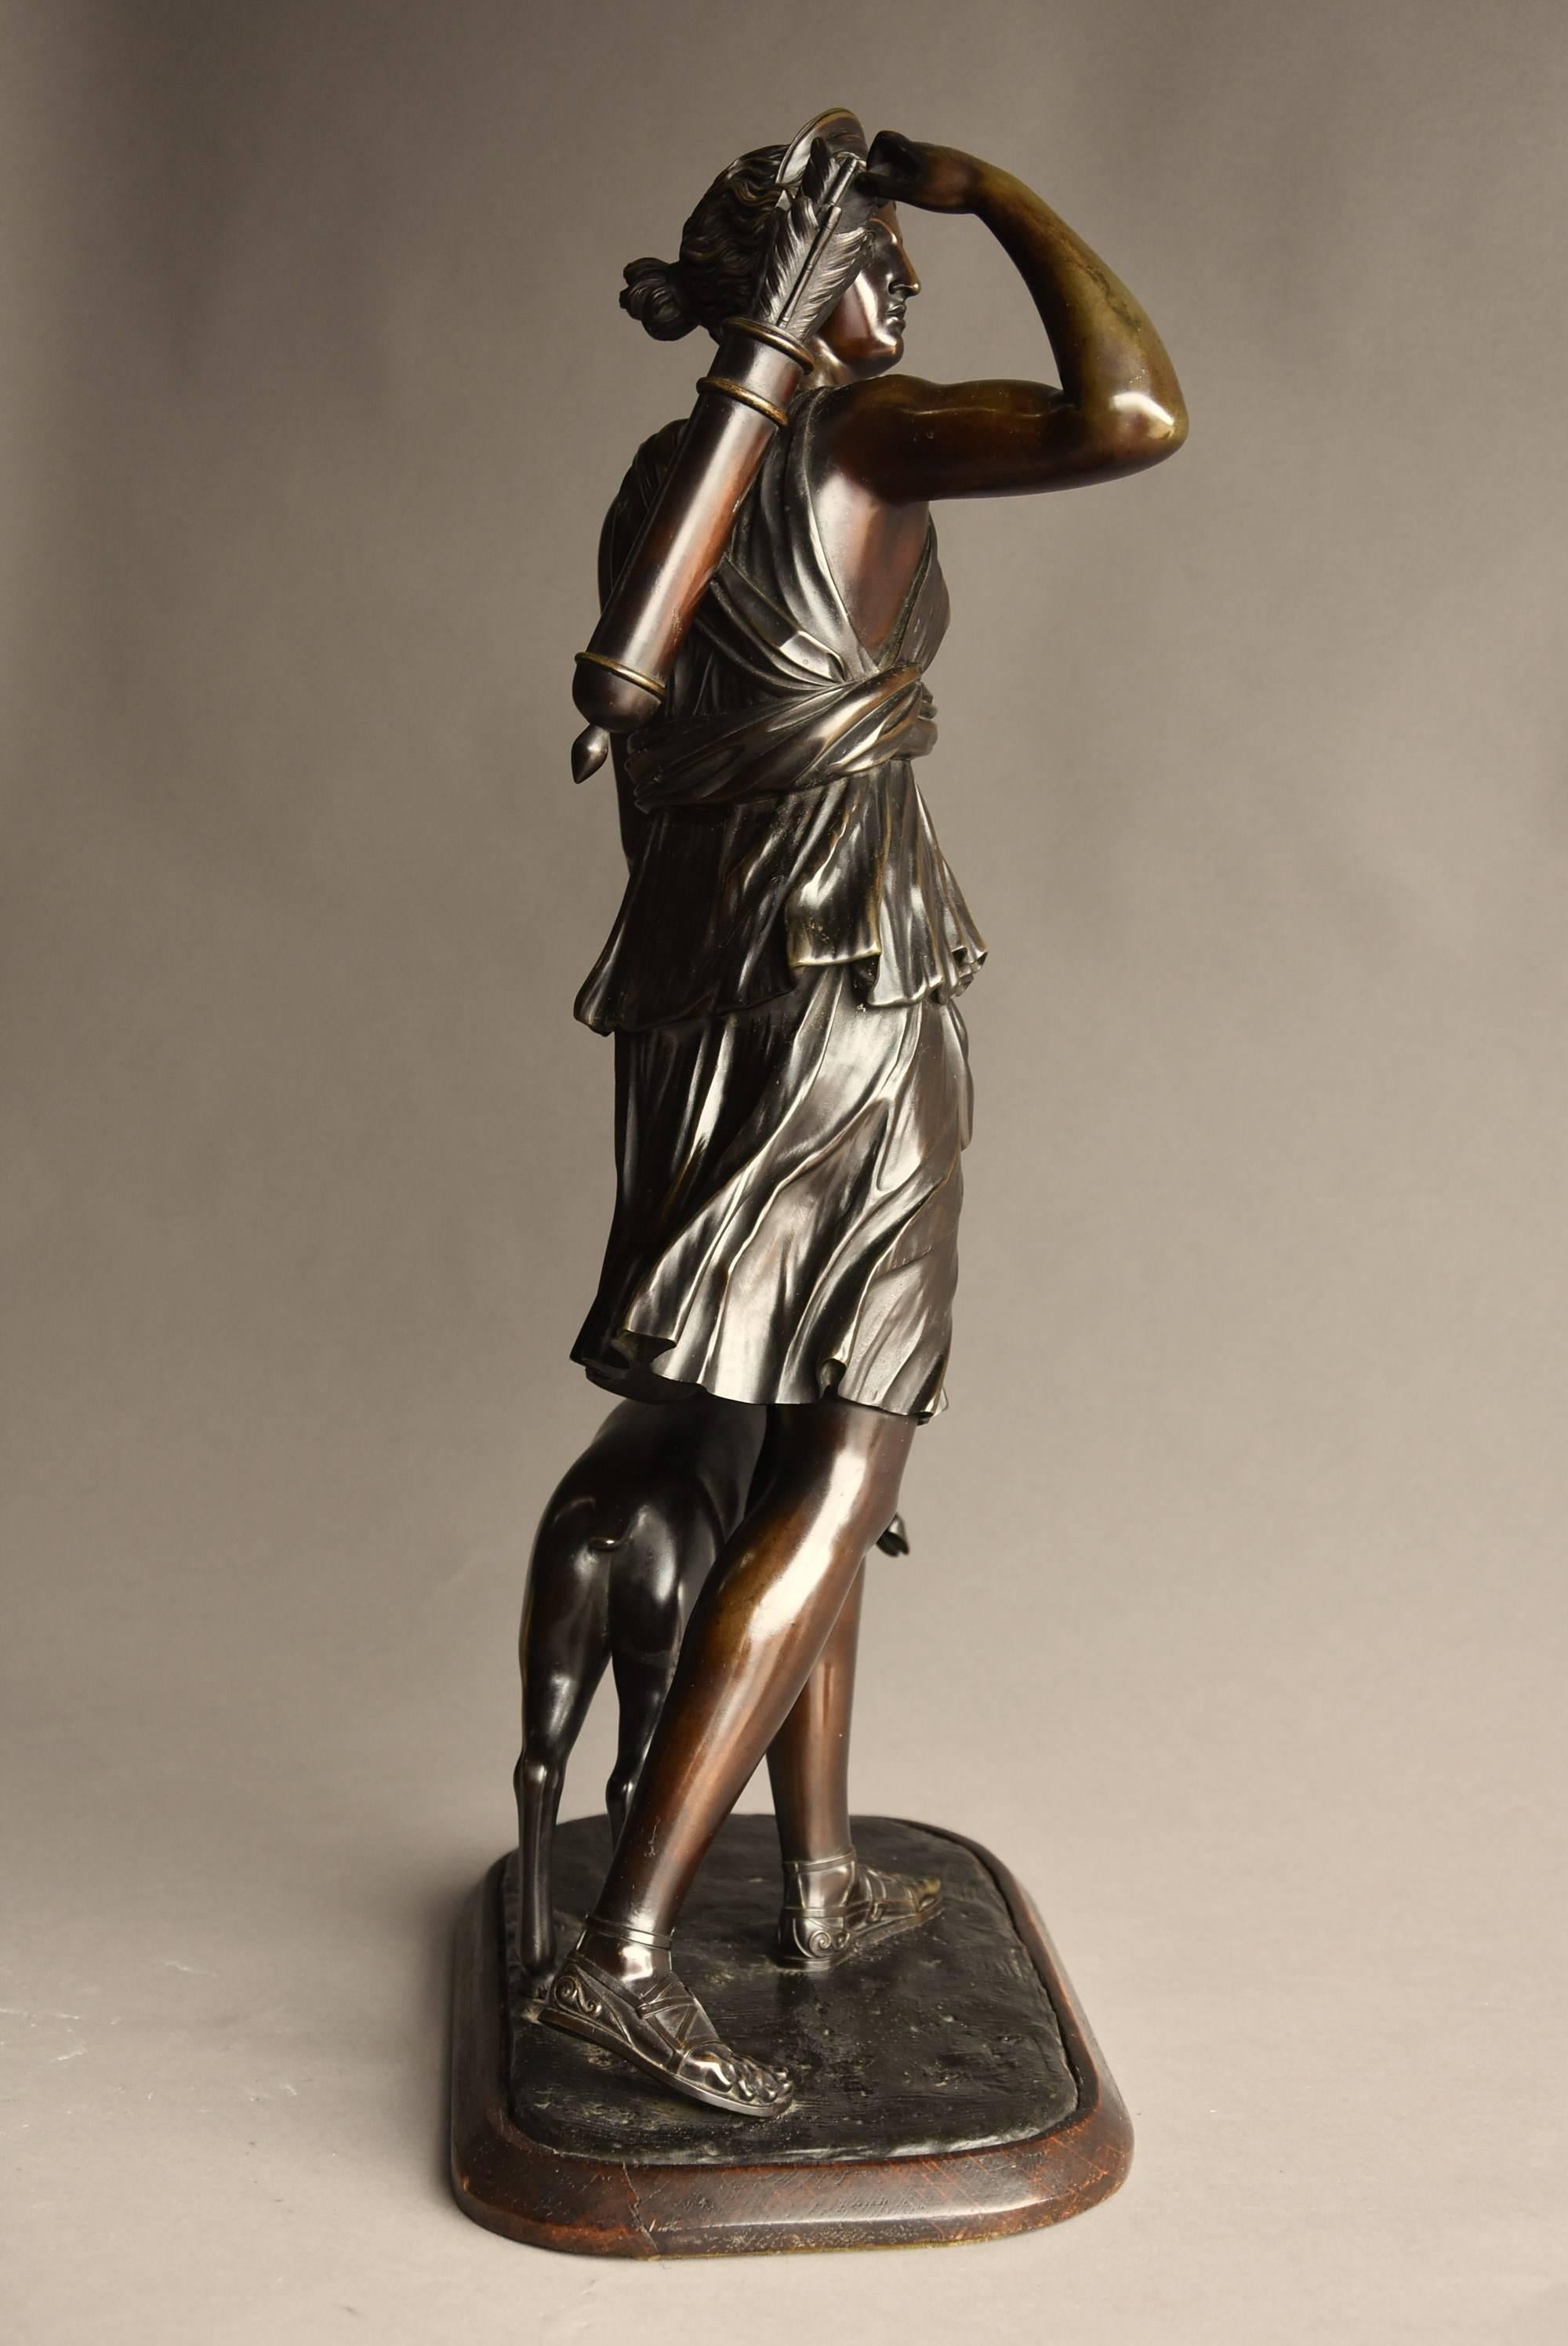 French Mid-19th Century Bronze Figure 'Diana of Versailles' or 'Diana the Huntress'